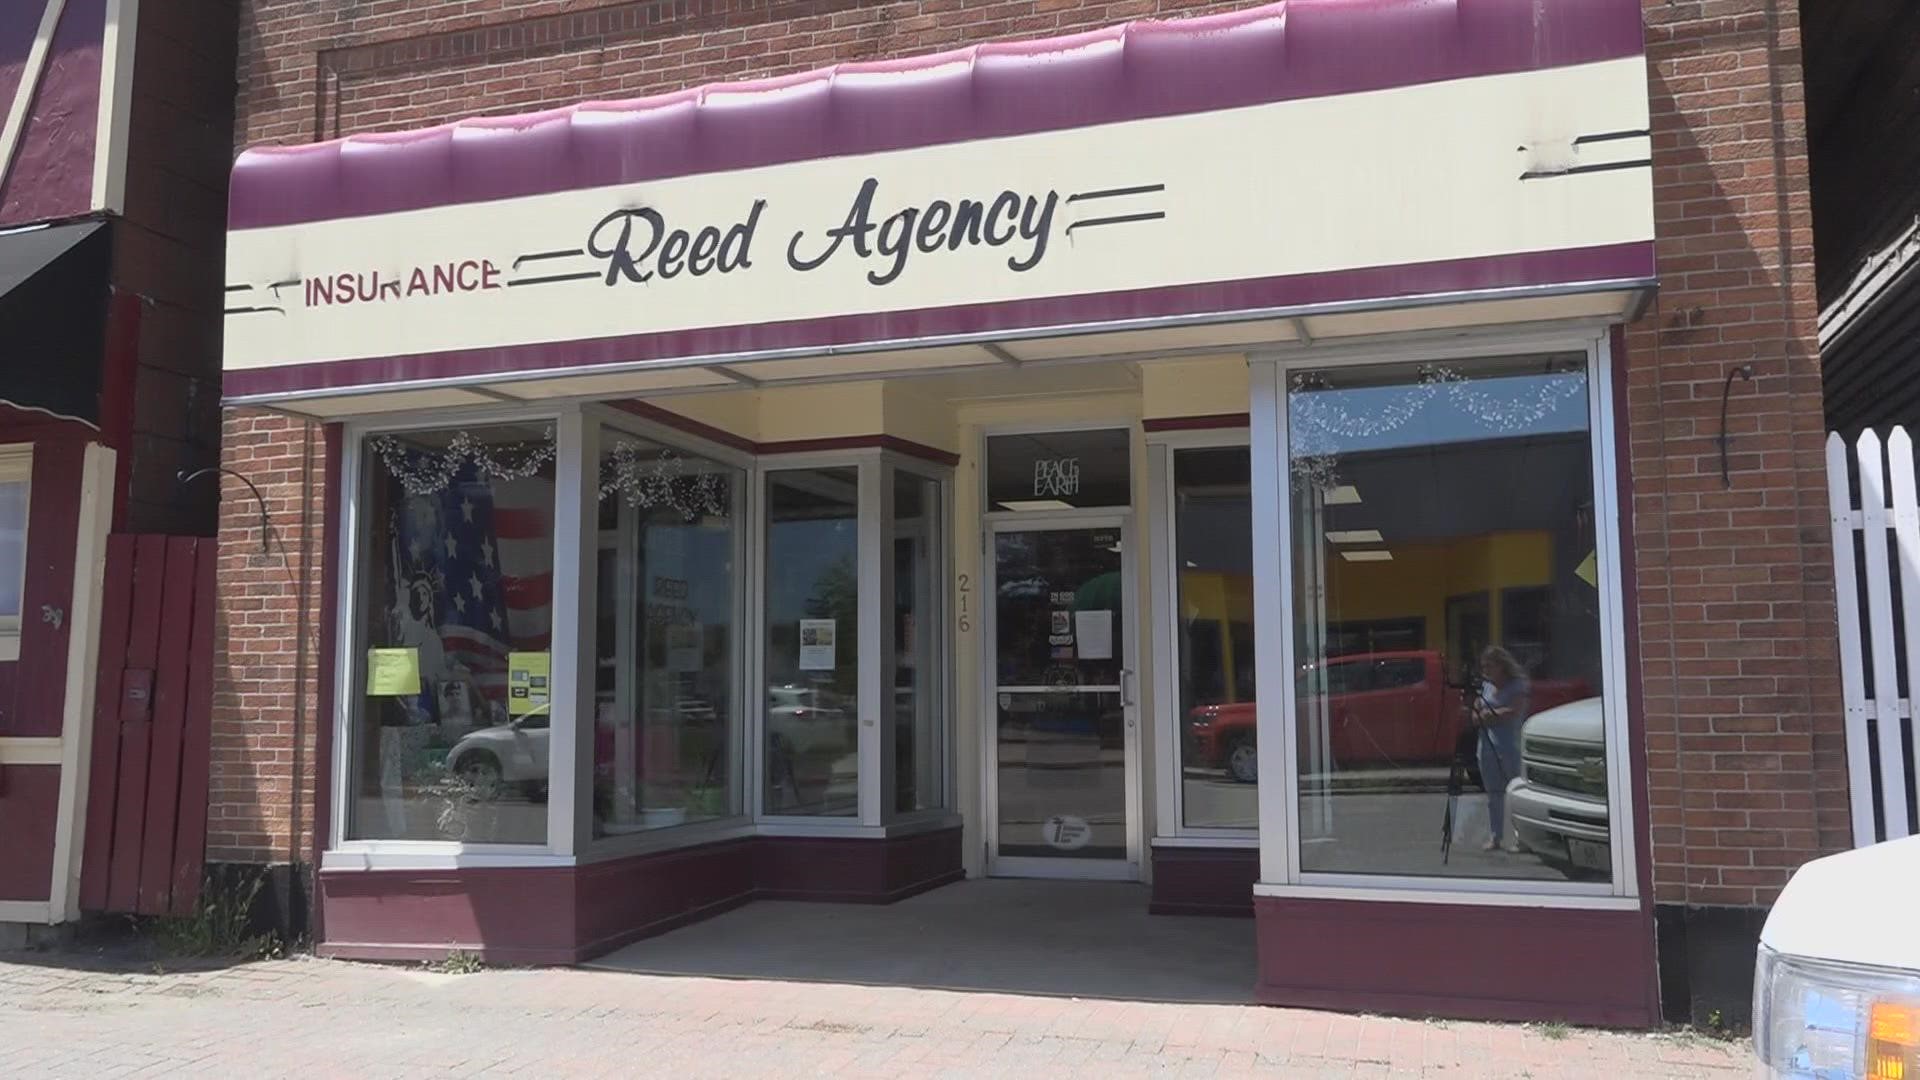 The sign caused similarly named agencies in Maine and across the country to experience unwarranted backlash from people confusing them with the Millinocket agency.